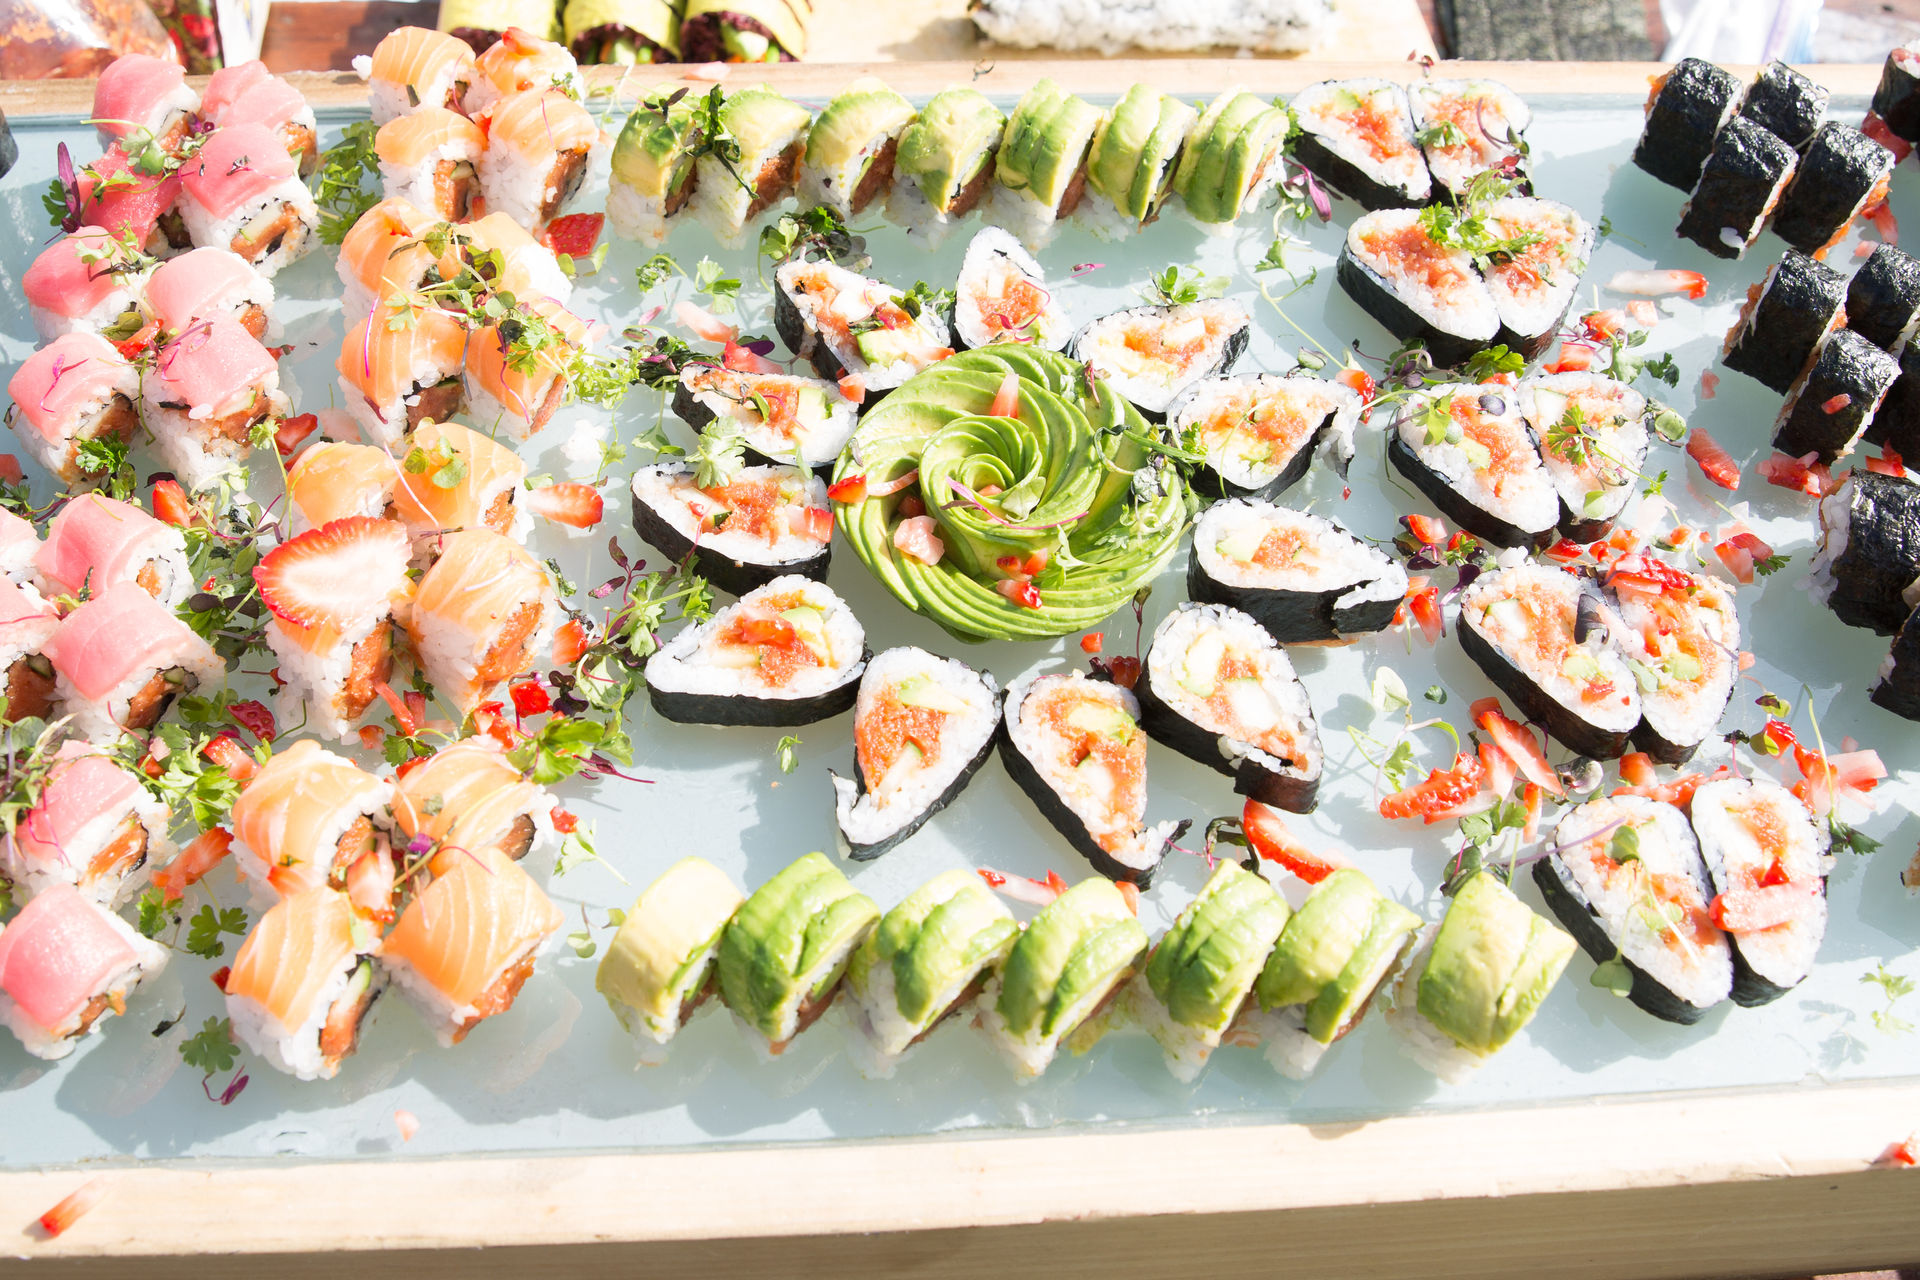 Private Sushi Bar: Impress Your Guests with a Live Action & Interactive Sushi Experience (Up to 50 People) image 2